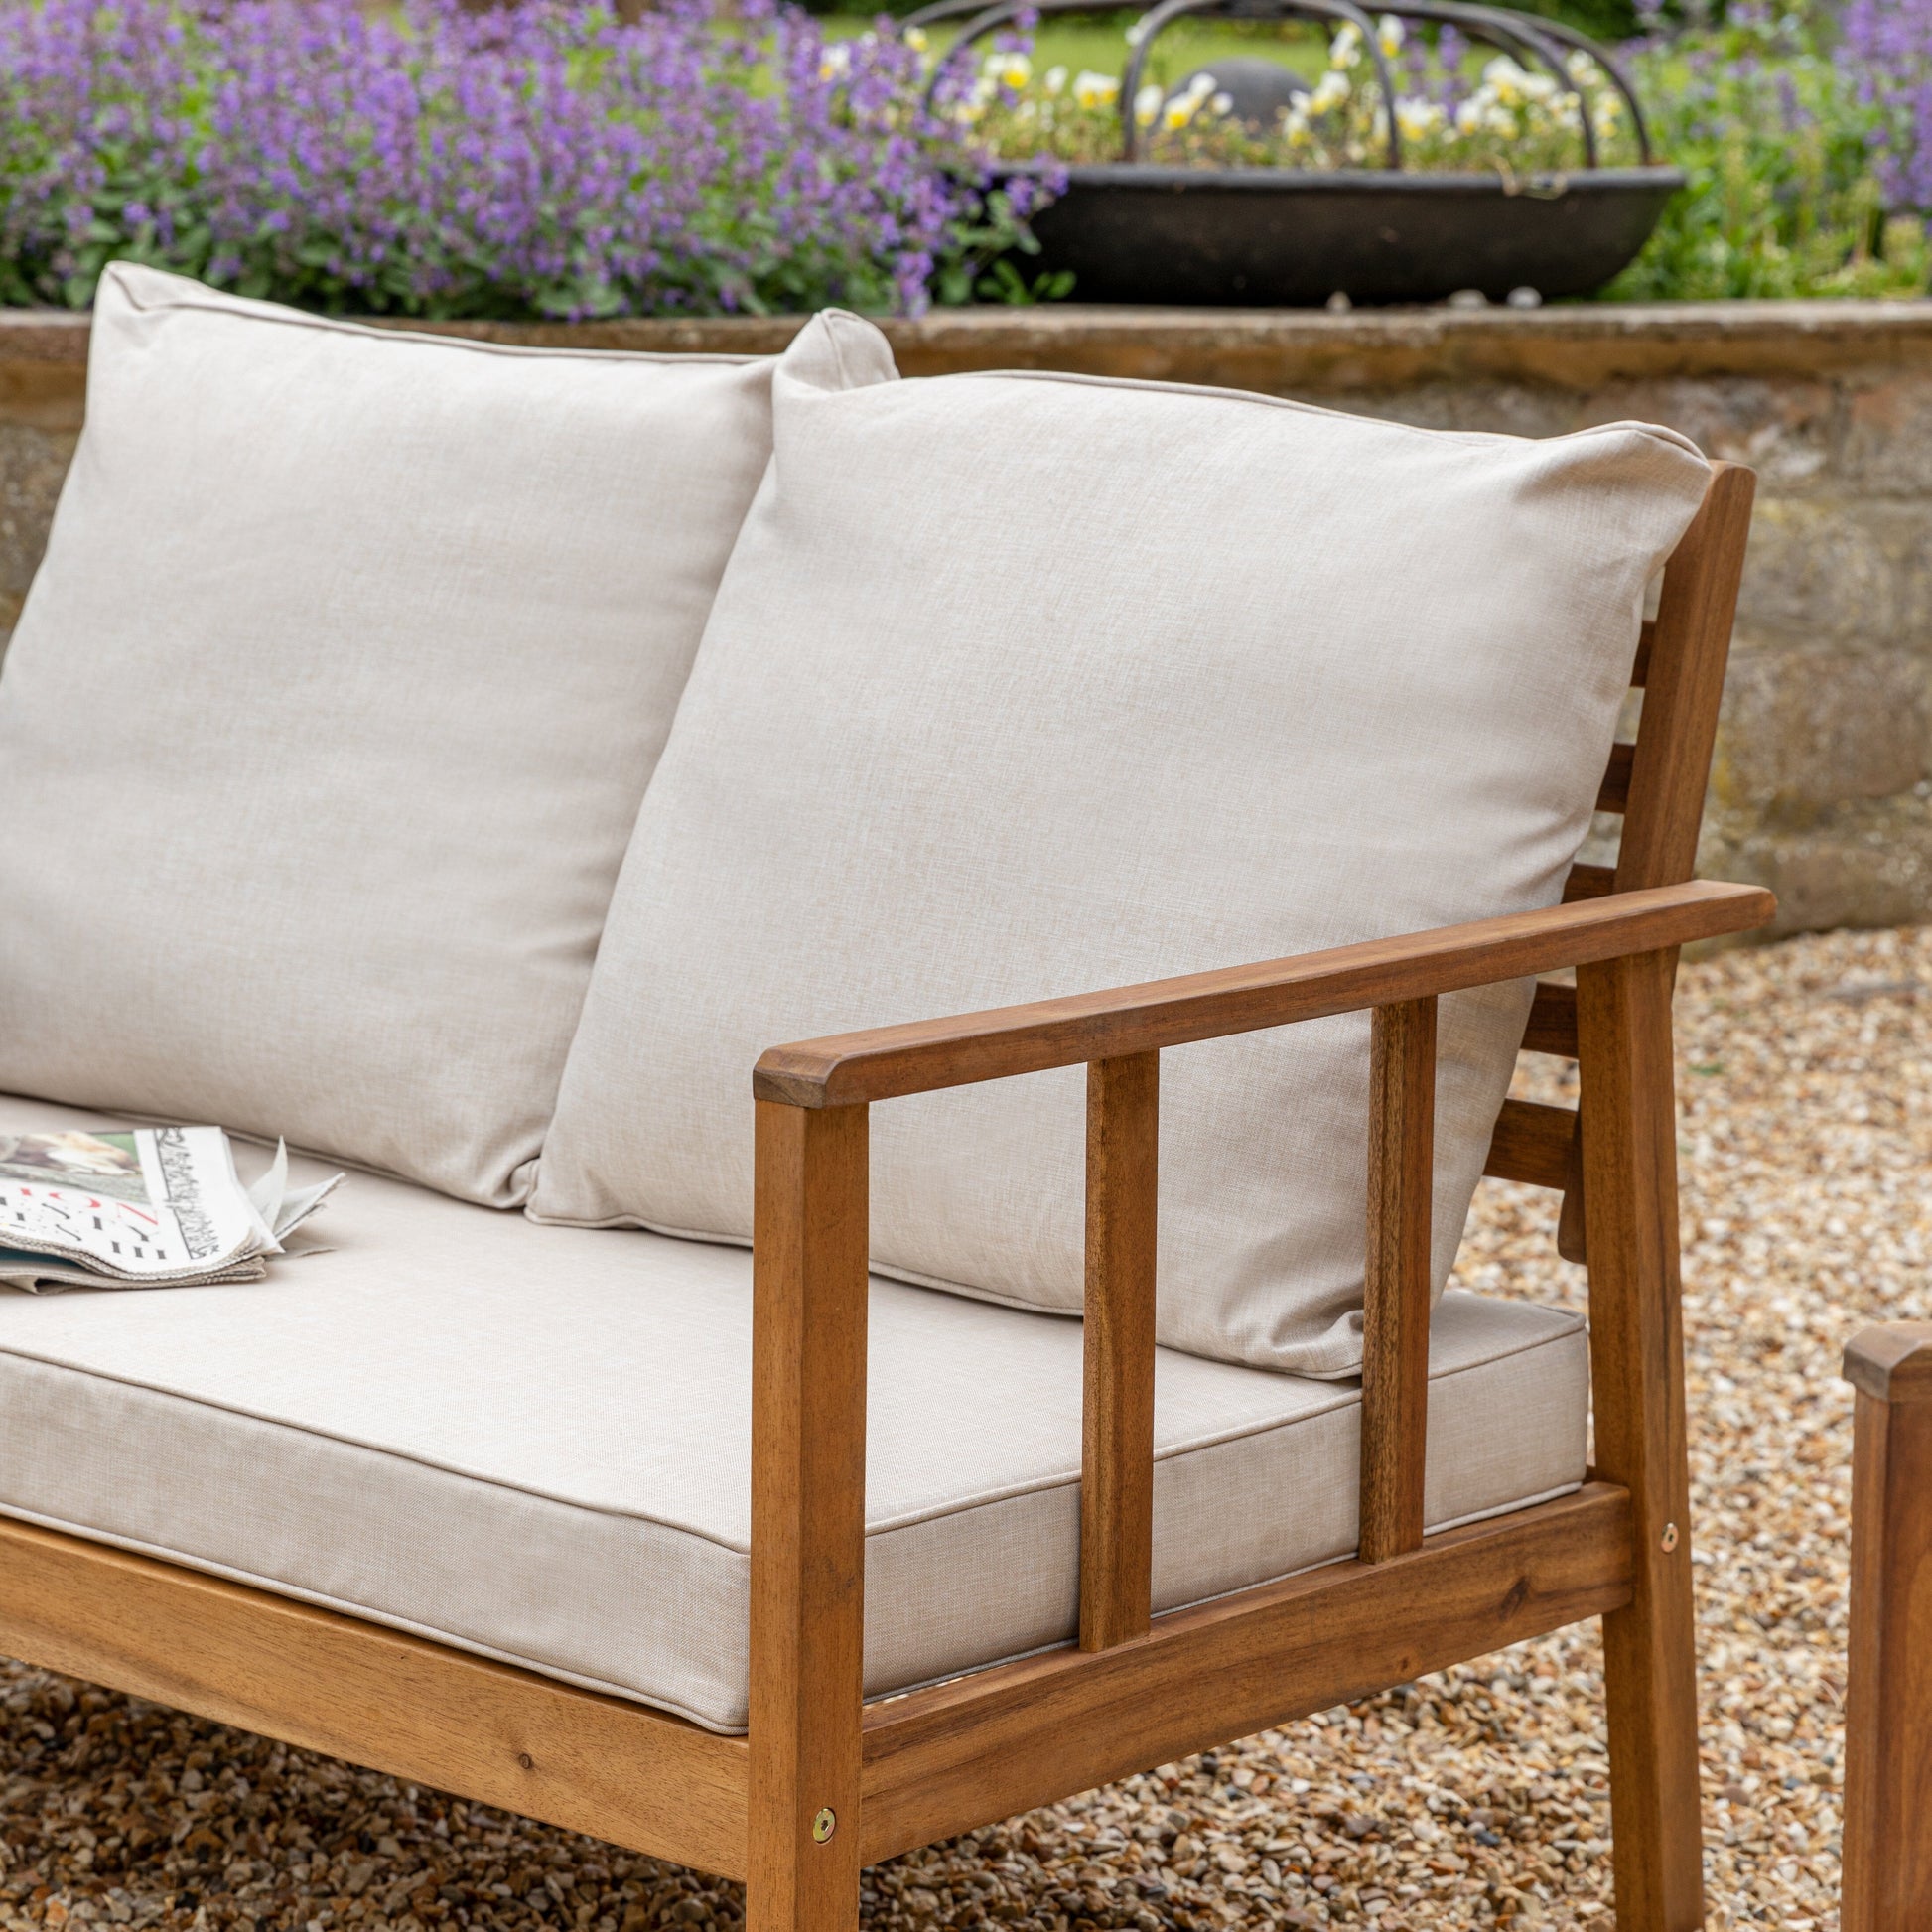 Harrelson Outdoor Wooden Double Sofa Set with 2 Armchairs & Cream LED Parasol - Laura James